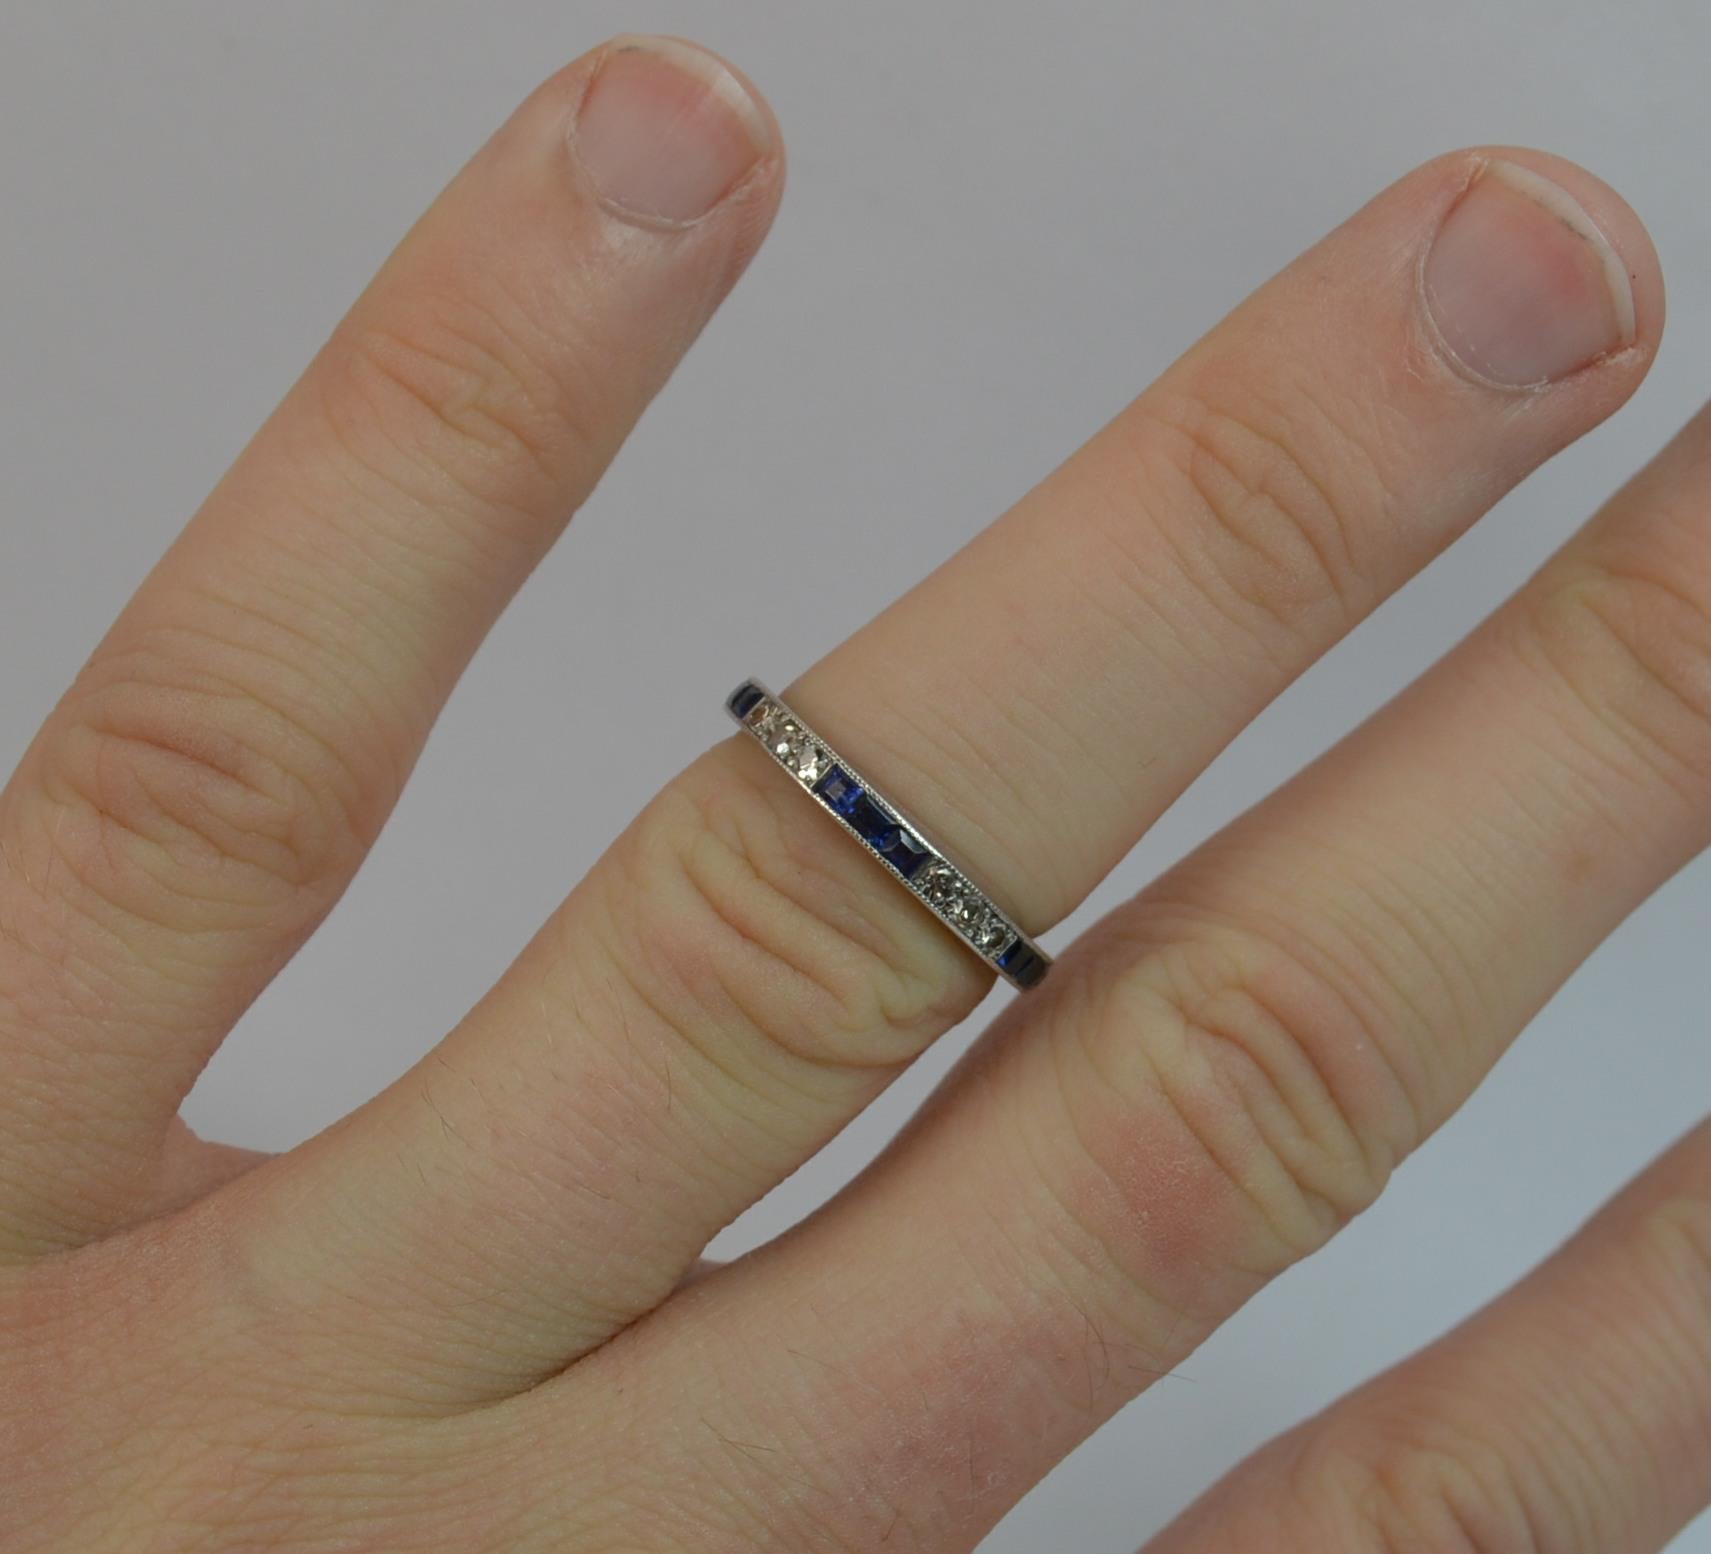 A stunning ladies full eternity ring. Solid platinum ring. Set with princess cut natural sapphires stones and round cut diamonds in lots of 3's. 2.2mm thick band throughout, protruding 1.65mm off the finger. Grain setting to the front throughout.